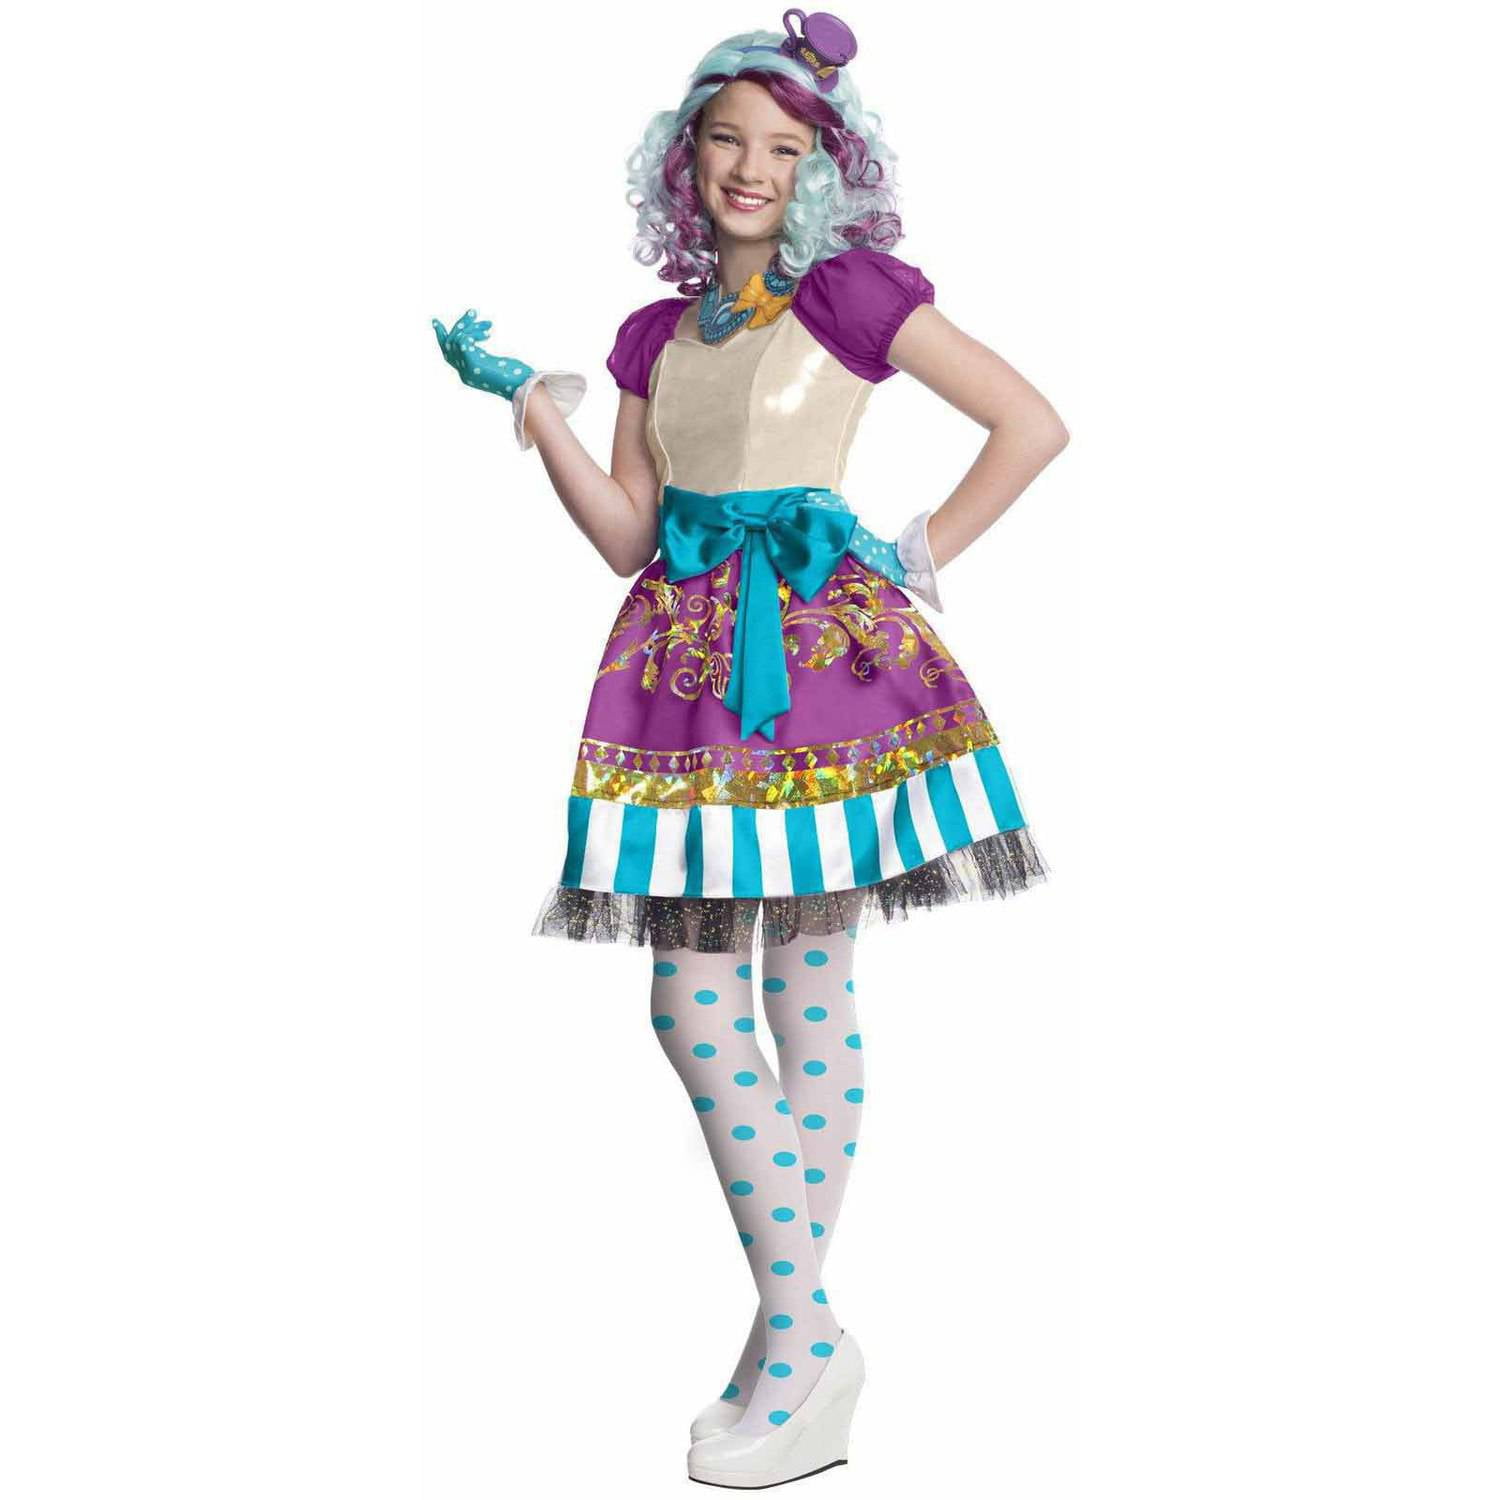 Child/'s Girls Cute Ever After High Madeline Hatter Dress Costume